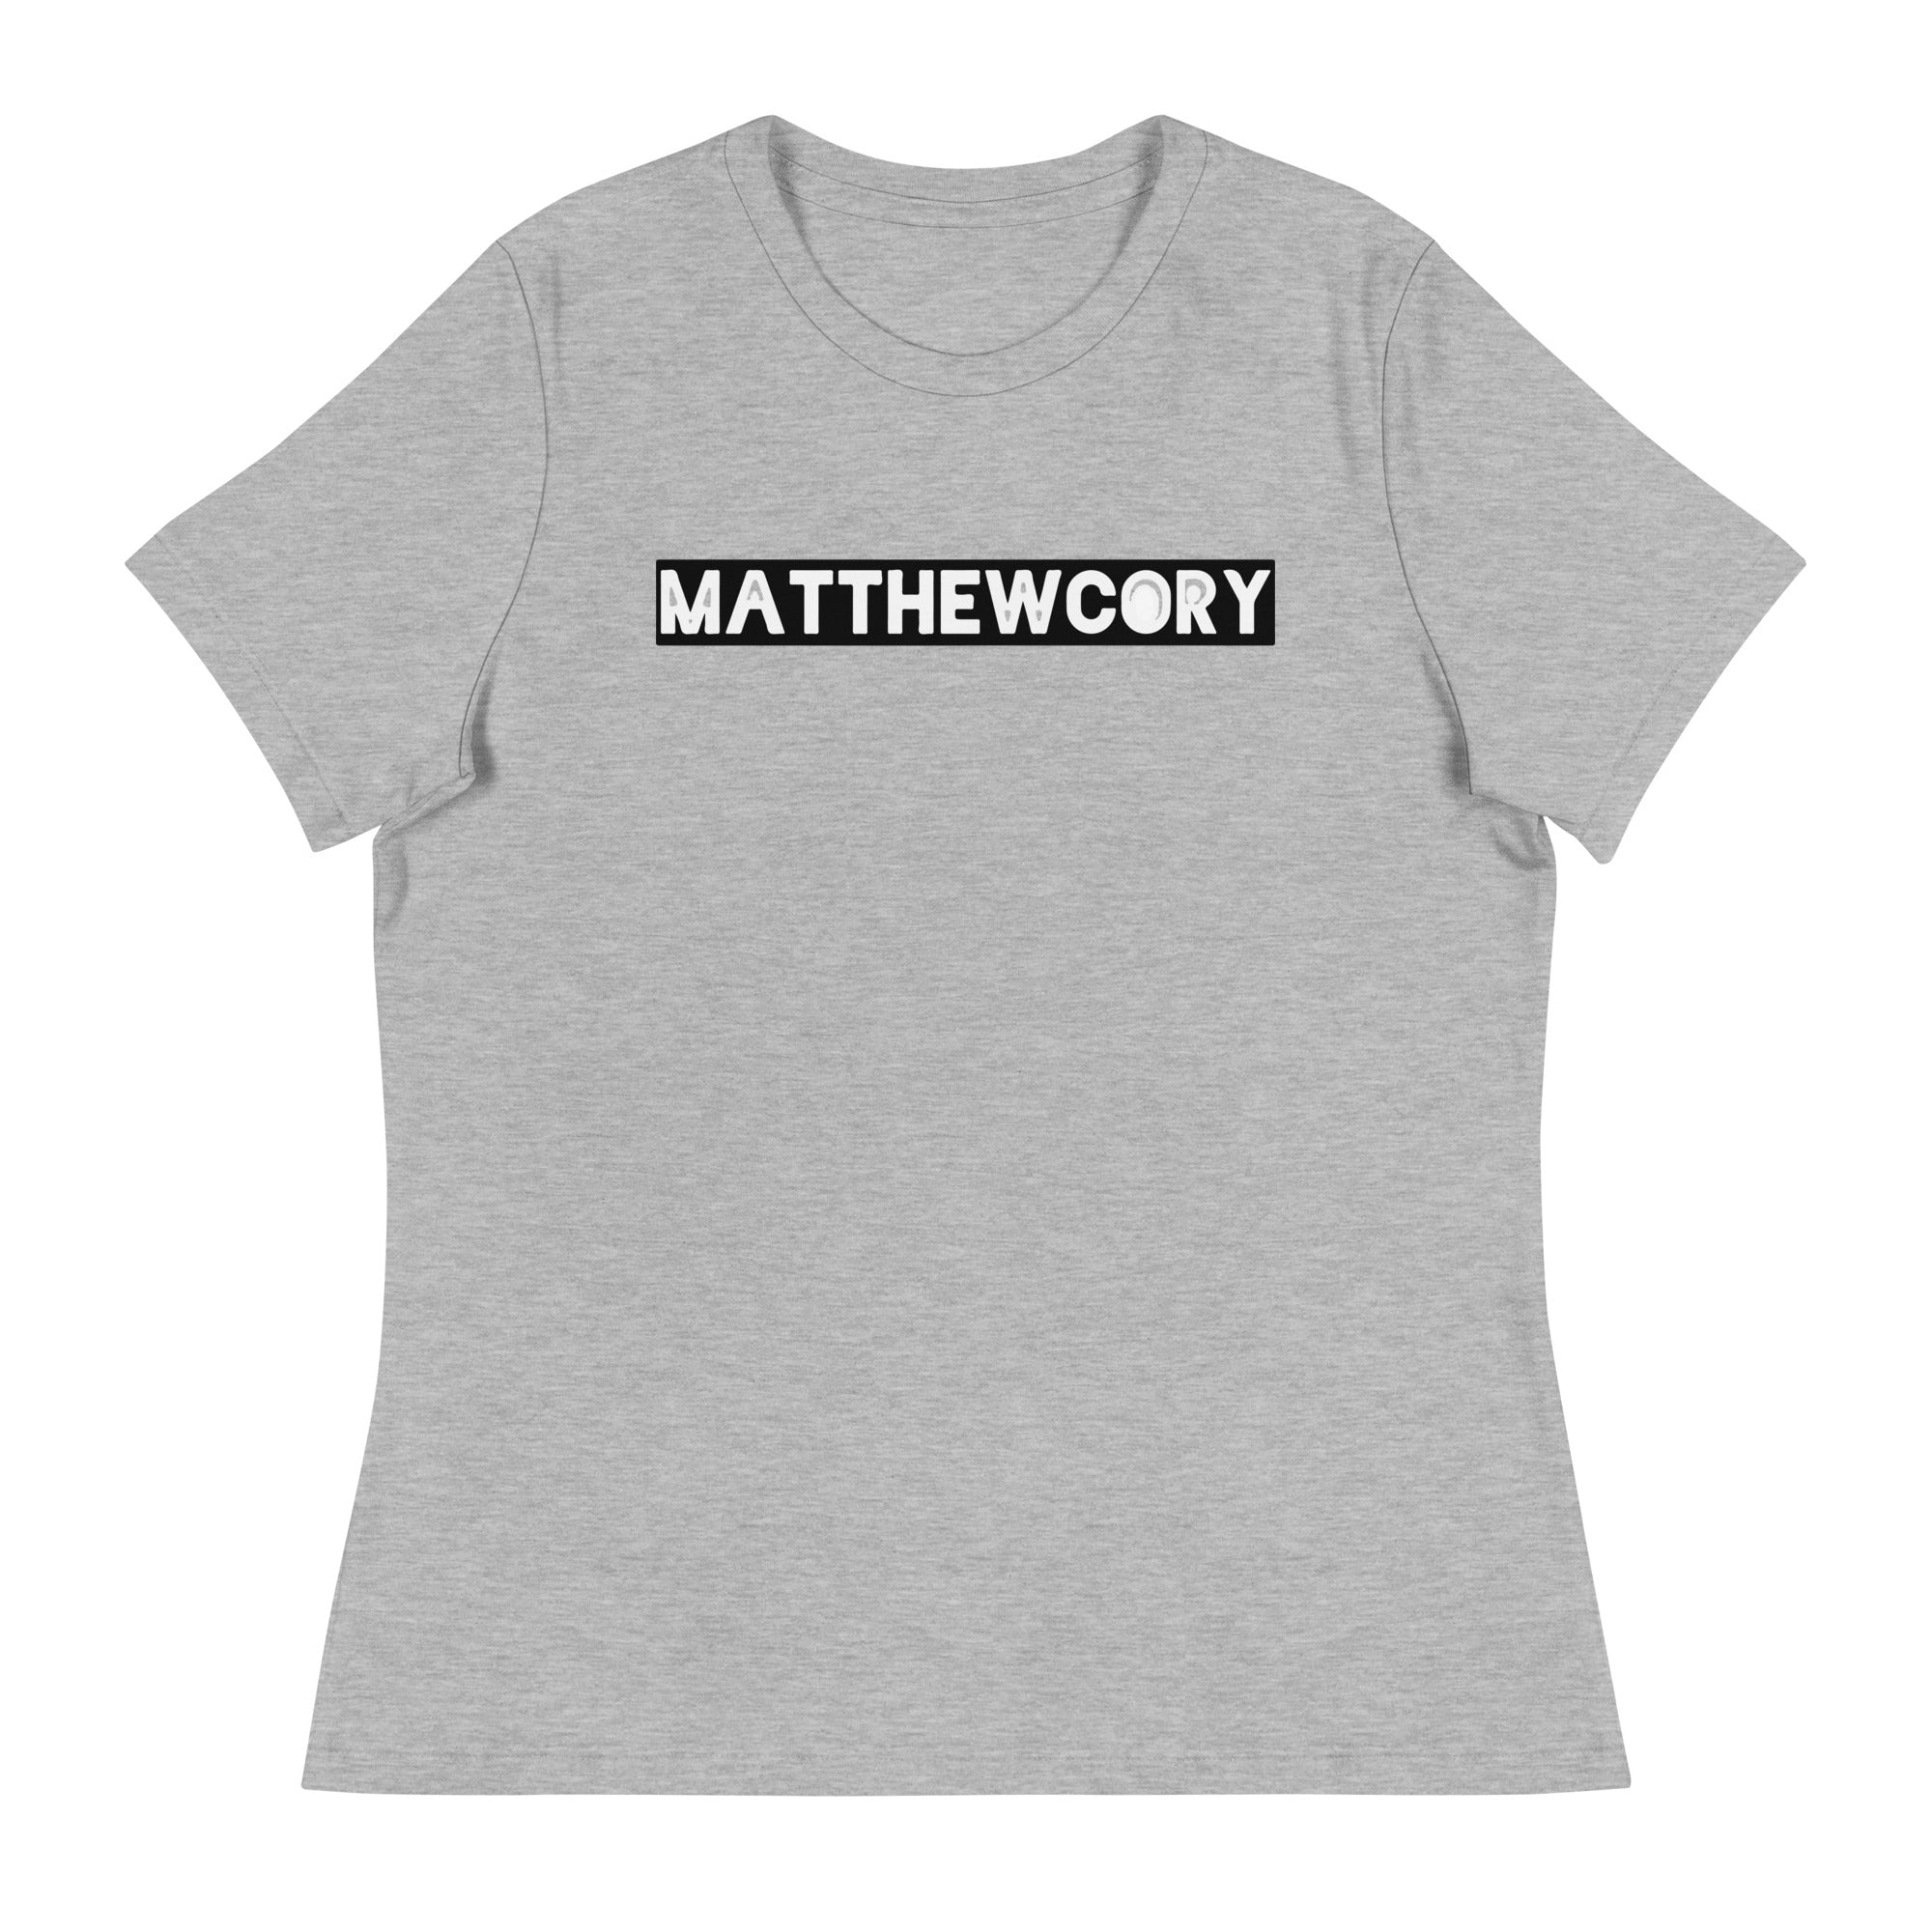 Thriving Faith Women's Relaxed T-Shirt (Matthew Cory Square text)